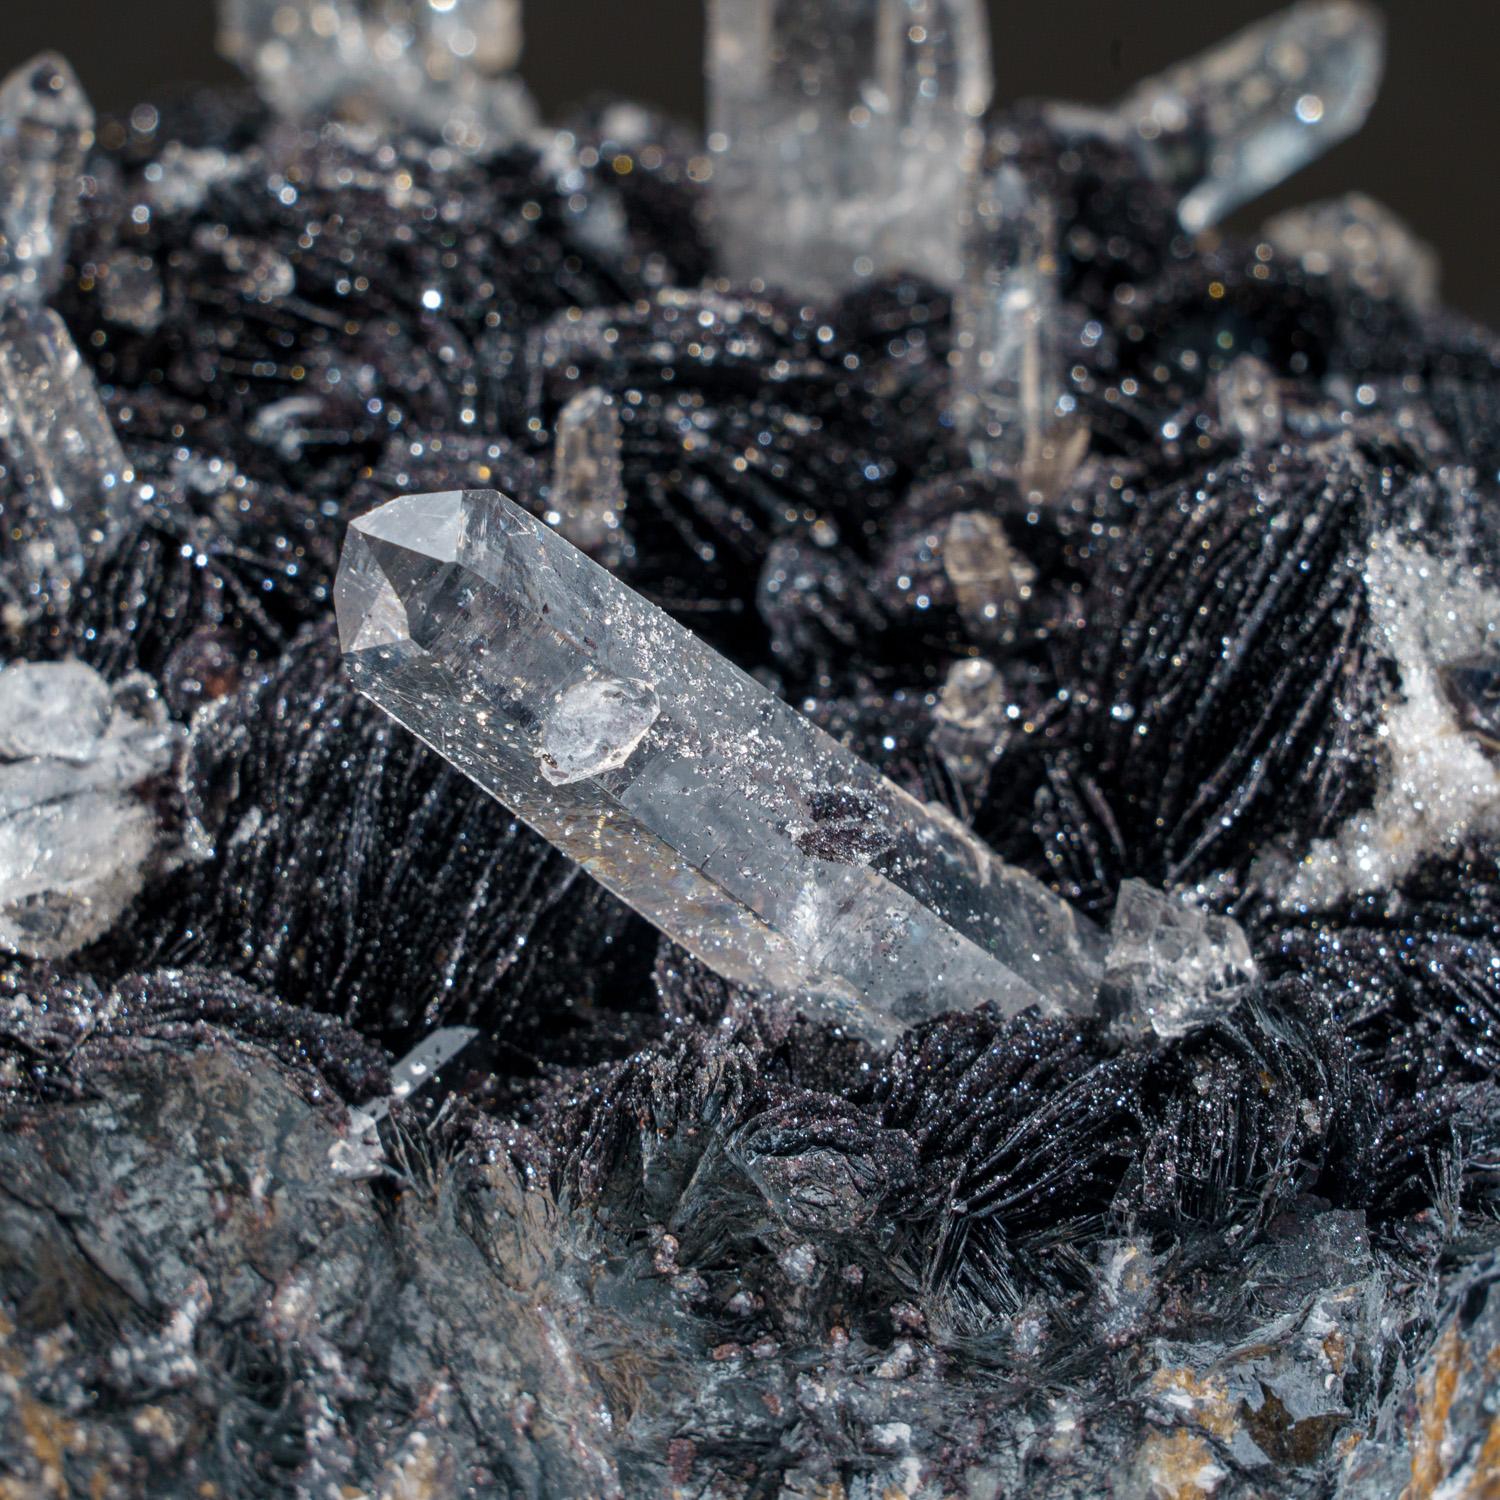 From Lechang Mine, Lechang County, Heyuan Prefecture, Guangdong Province, China

Rosette of bladed black hematite crystals intergrown with 3